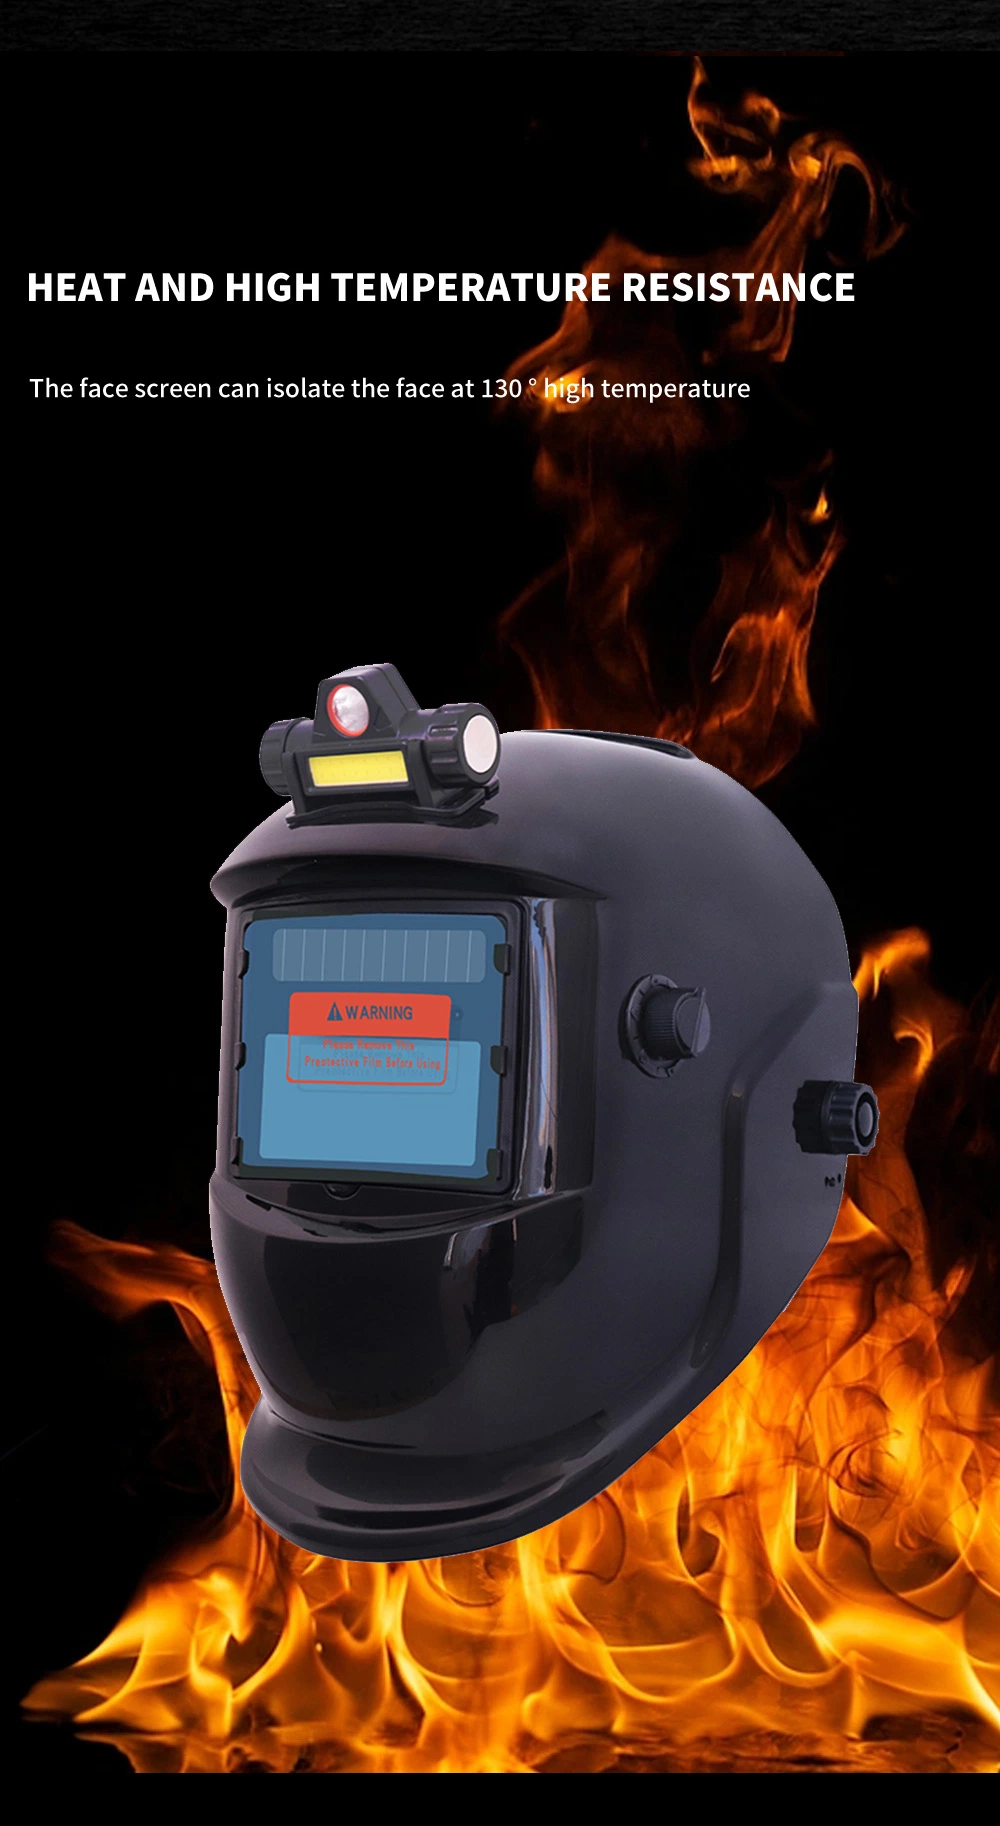 107 Series Solar Auto Darkening Welding Helmet with CE Approved and Grinding Function